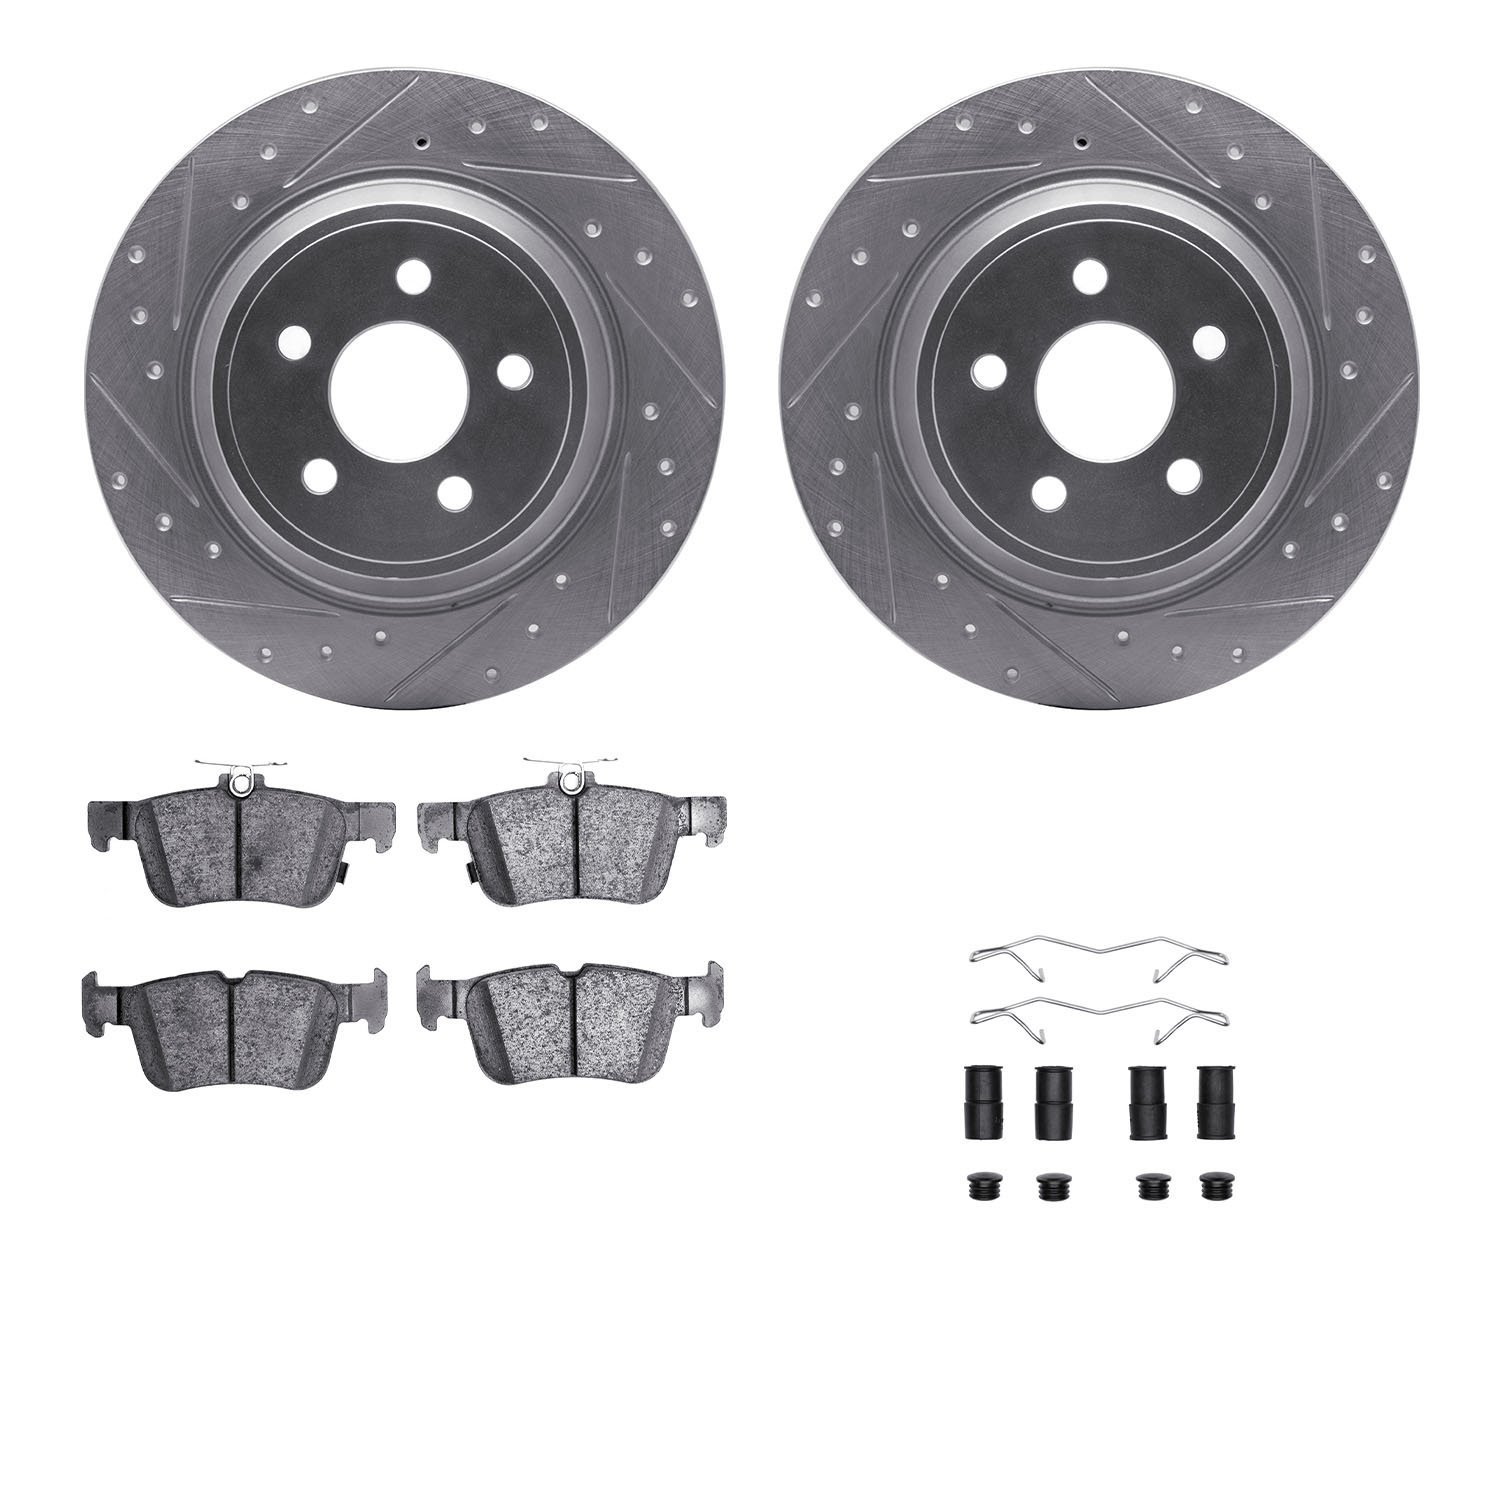 7312-55009 Drilled/Slotted Brake Rotor with 3000-Series Ceramic Brake Pads Kit & Hardware [Silver], Fits Select Ford/Lincoln/Mer